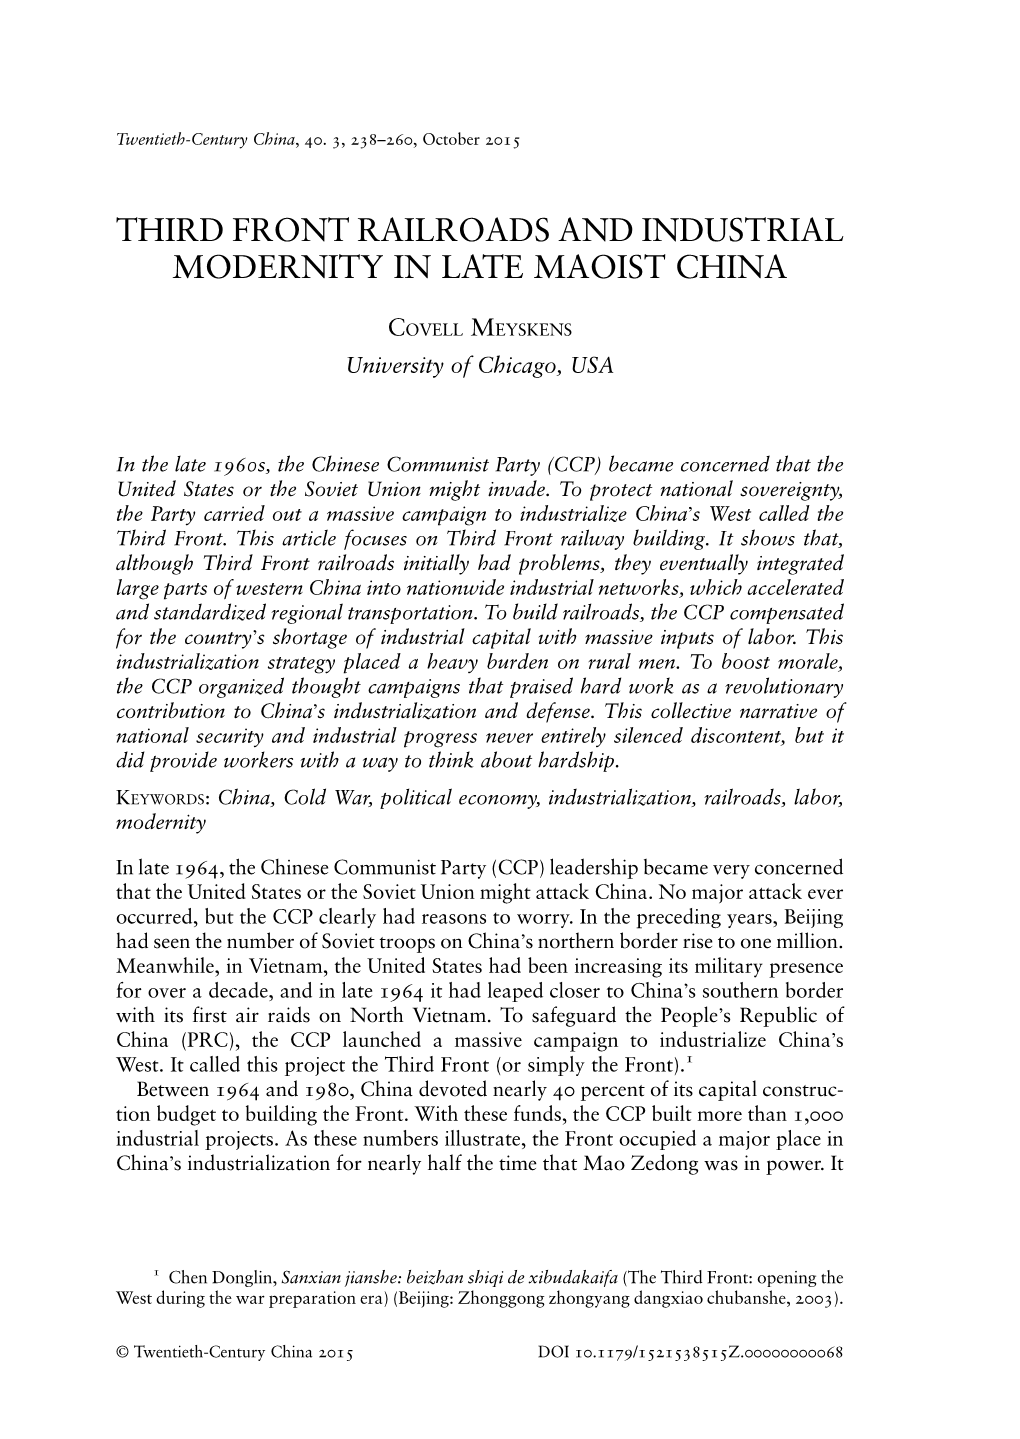 Third Front Railroads and Industrial Modernity in Late Maoist China